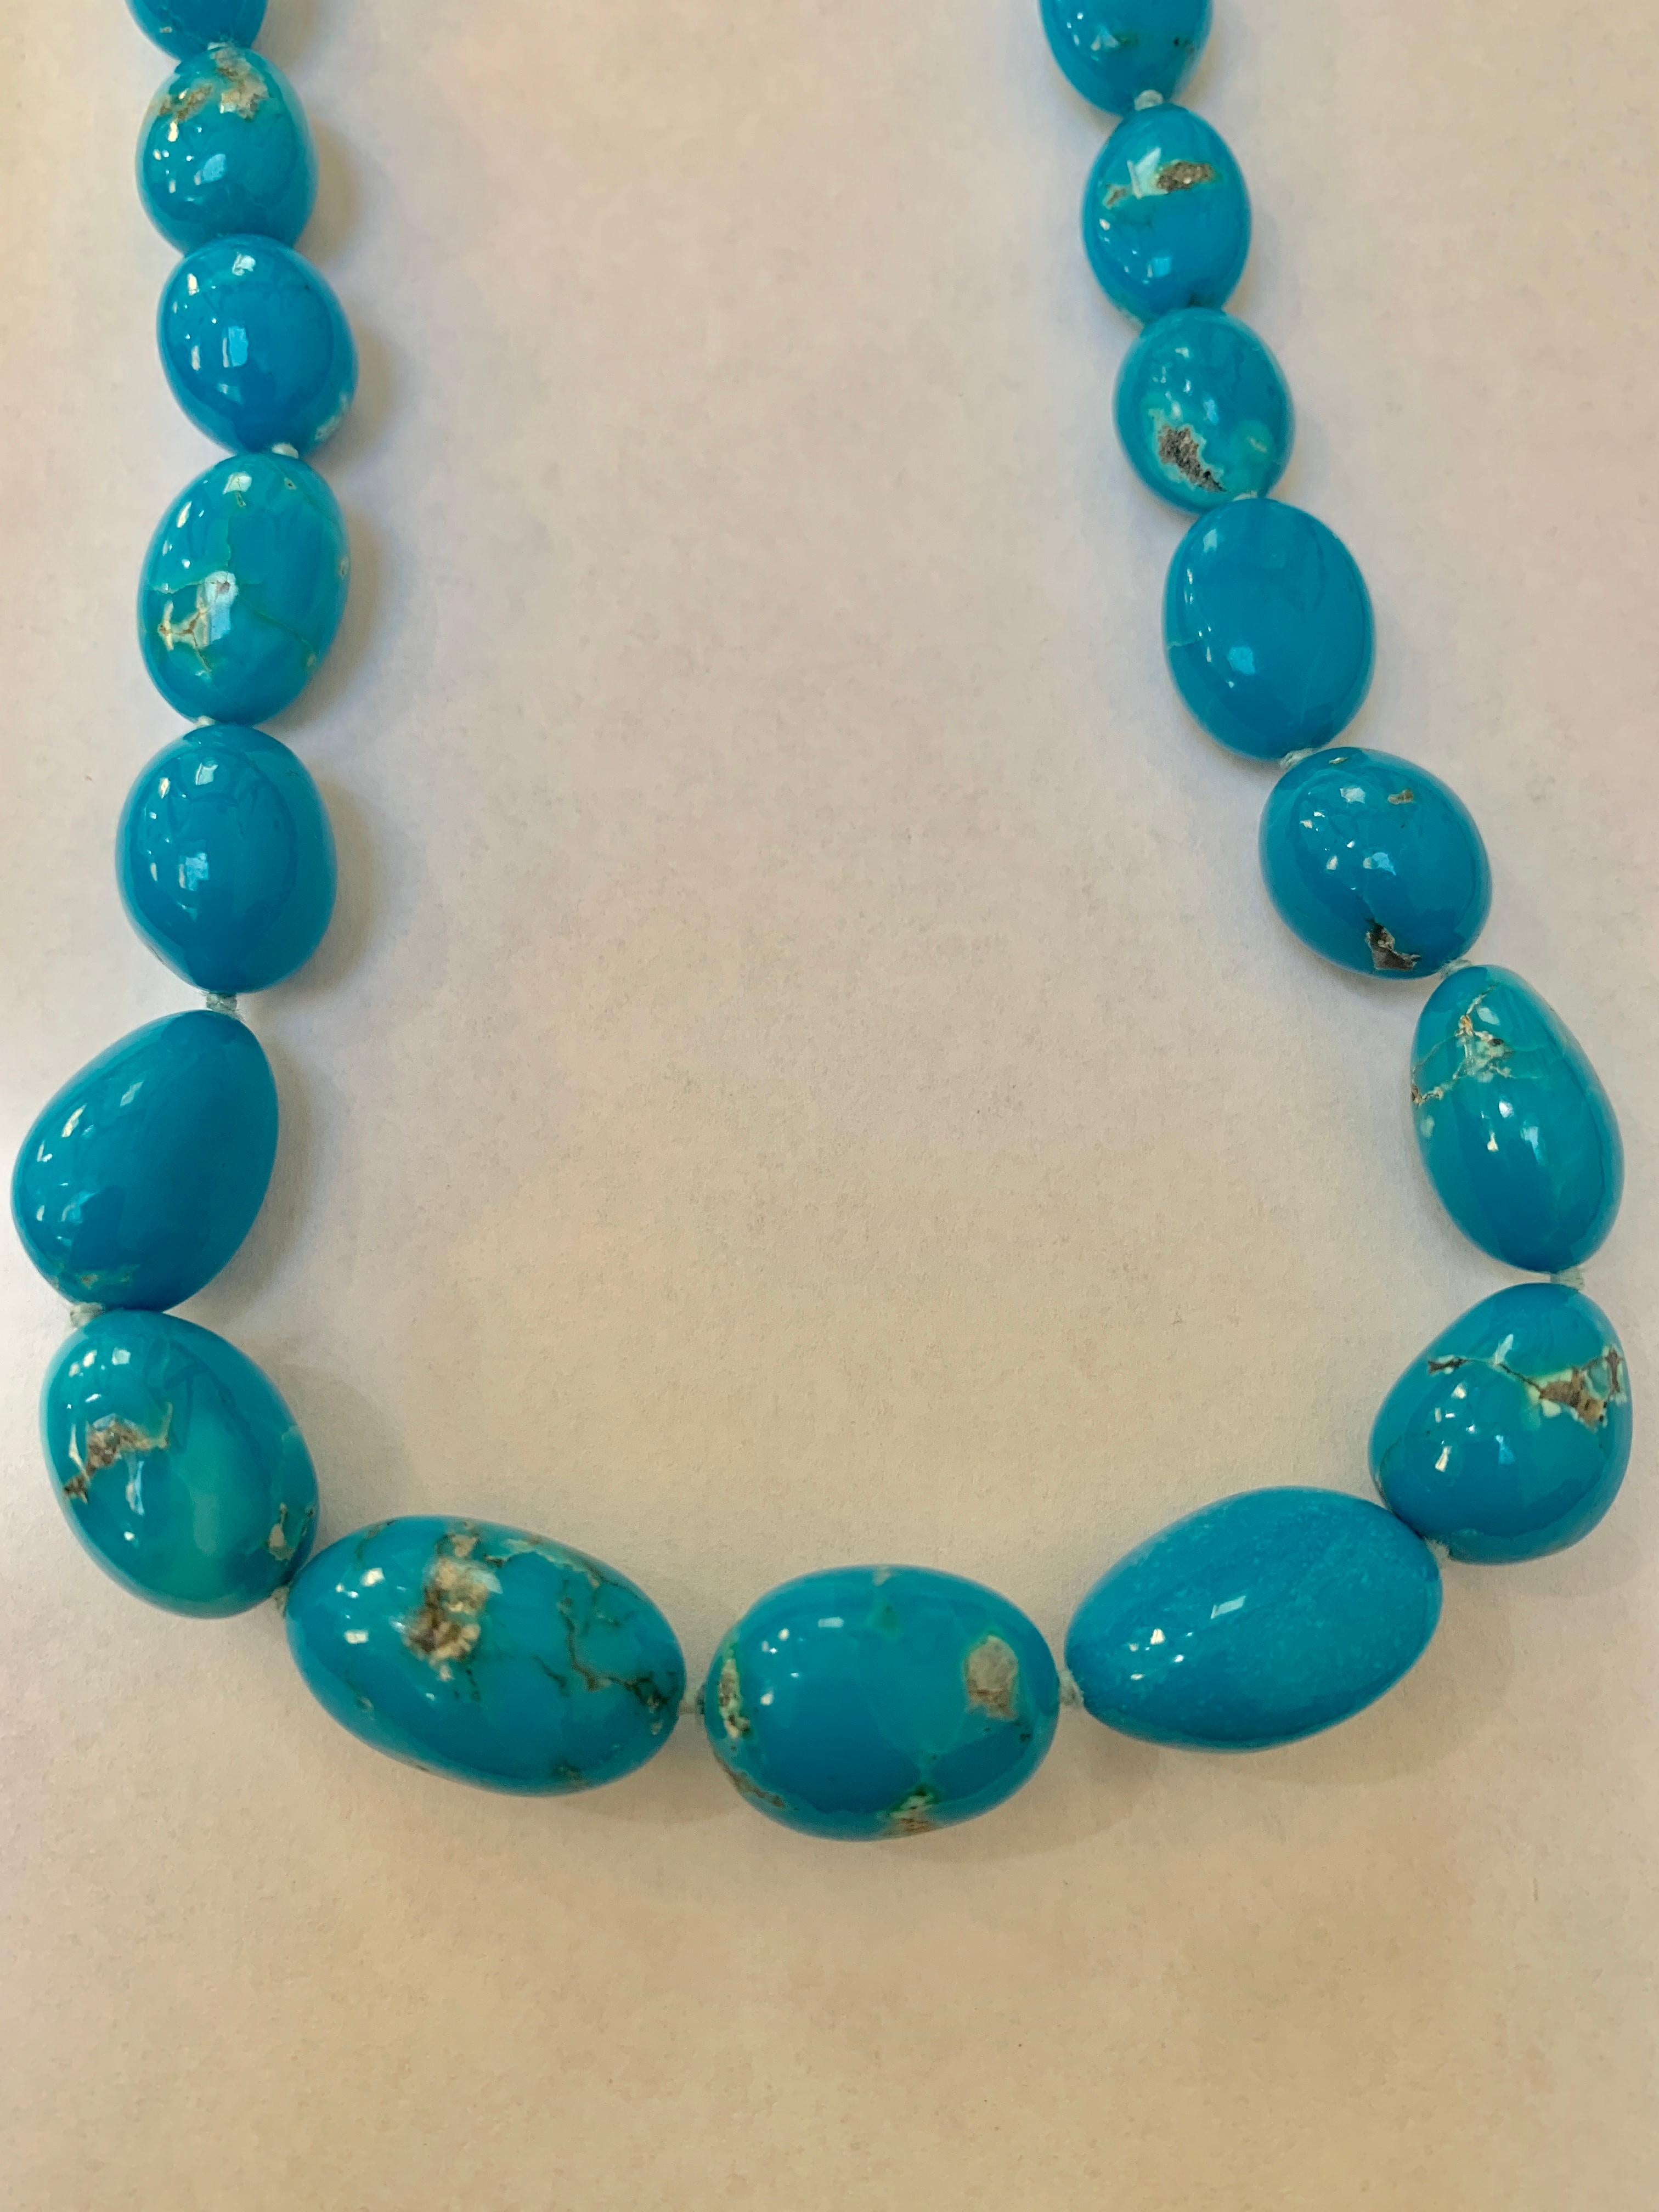 340 Carat Natural Sleeping Beauty Turquoise Necklace , Single Strand 14 K Gold
Natural Sleeping Beauty Turquoise which is very hard to find now. These beads have some colors
Necklace has 1 strand
Beads are graduating in size. range from 9X14 to